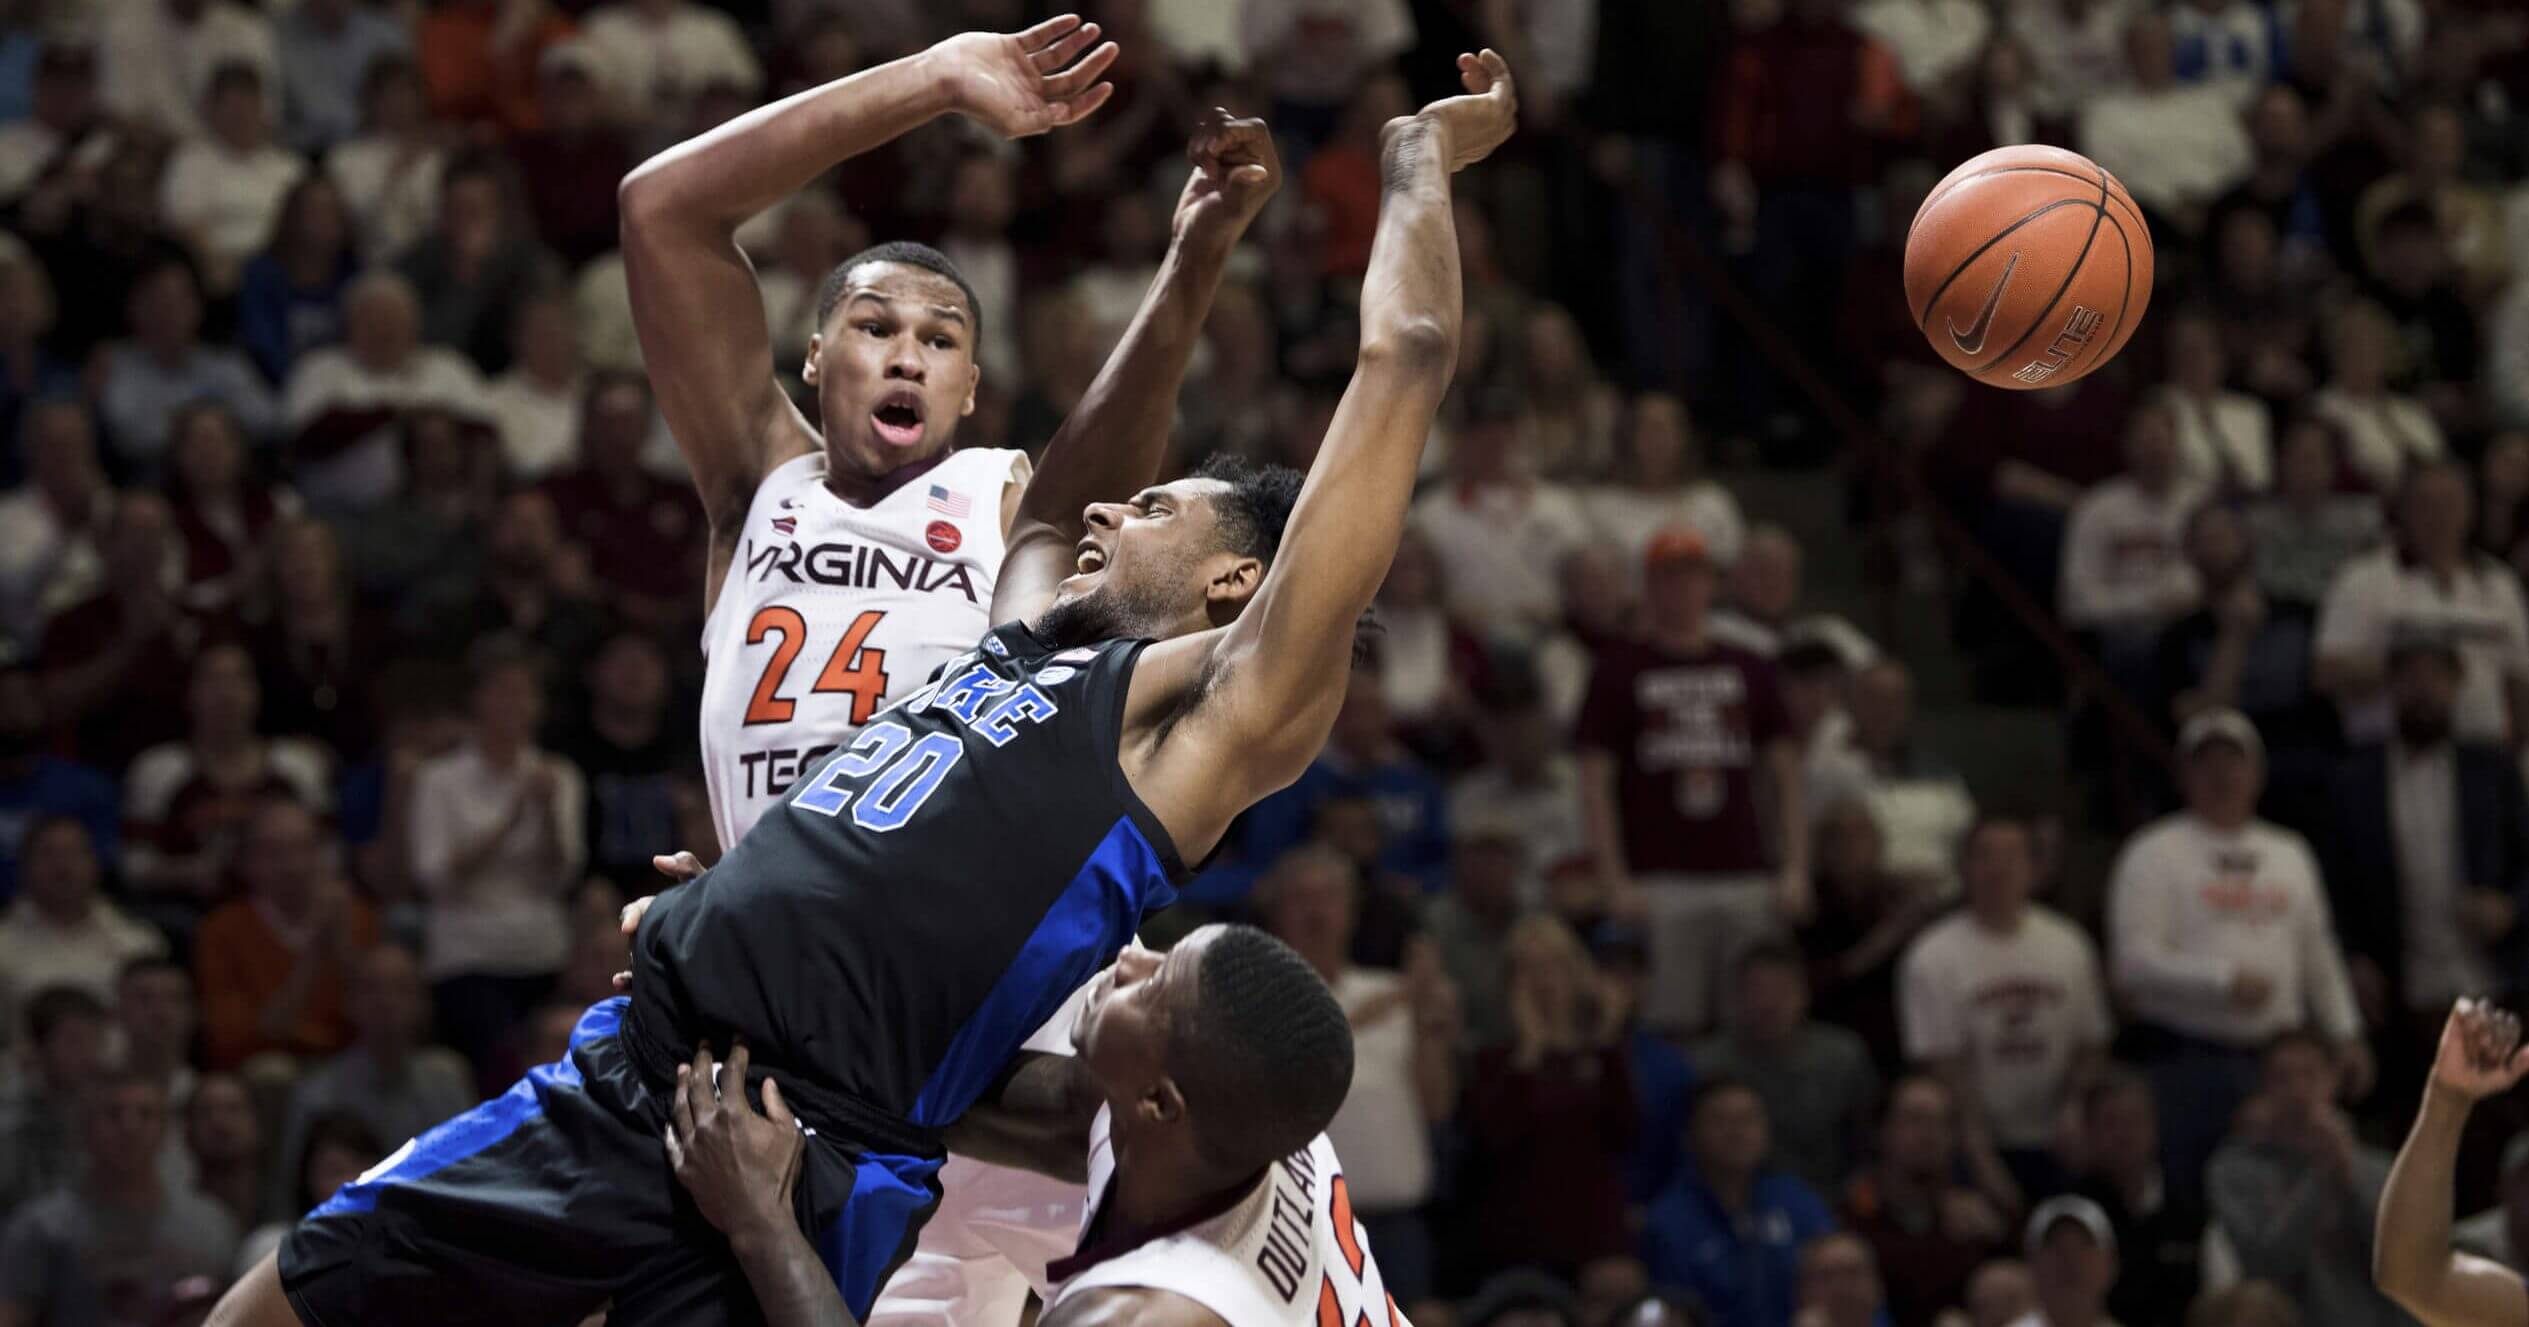 Duke center Marques Bolden is fouled as Virginia Tech's Kerry Blackshear Jr. (24) and Ty Outlaw (42) defend during Tuesday's game in Blacksburg, Virginia